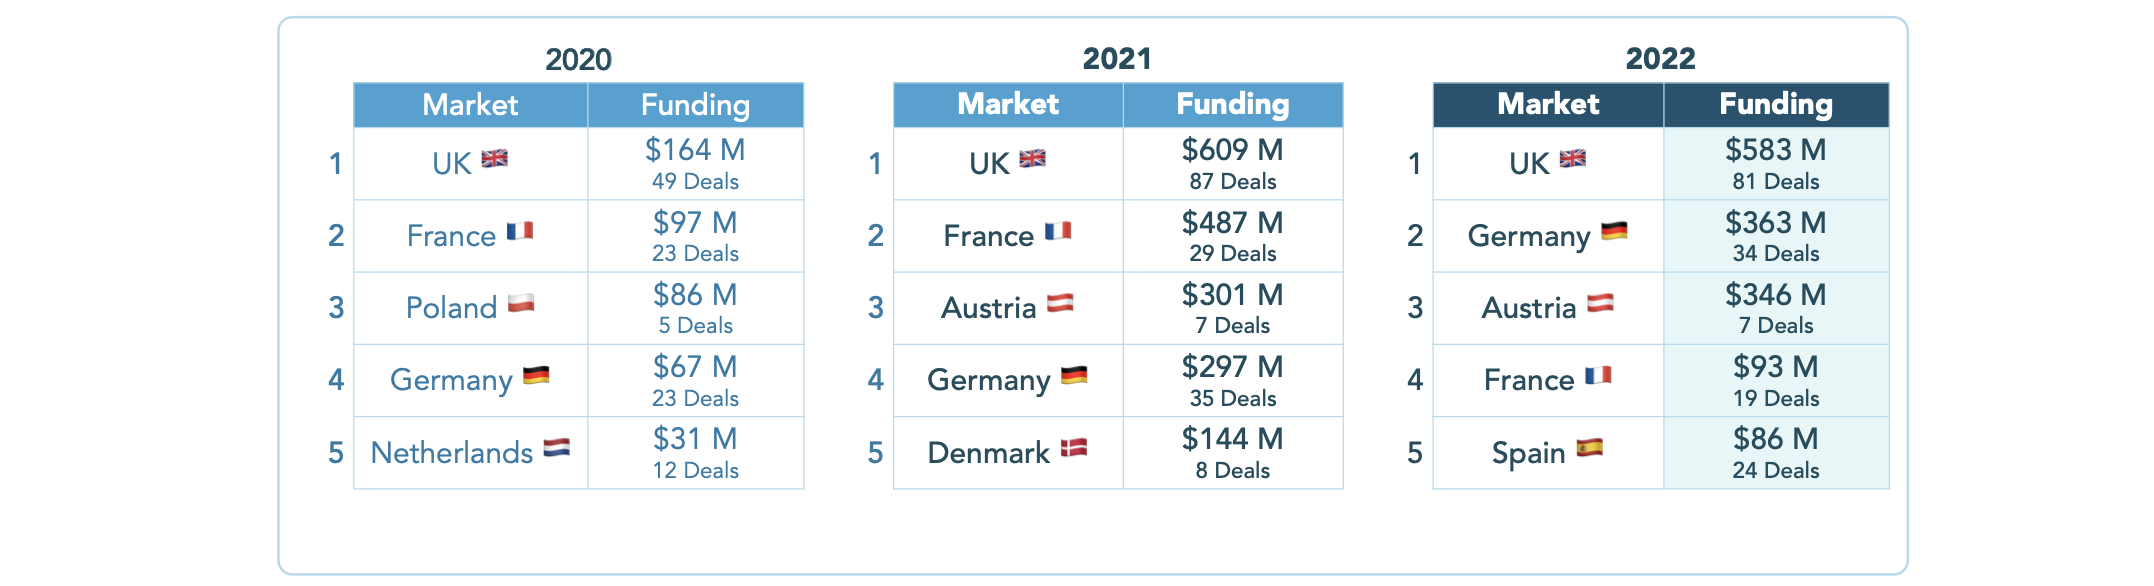 2022 European edtech report: Smaller rounds and fewer deals, but more angel activity - TechCrunch (Picture 2)